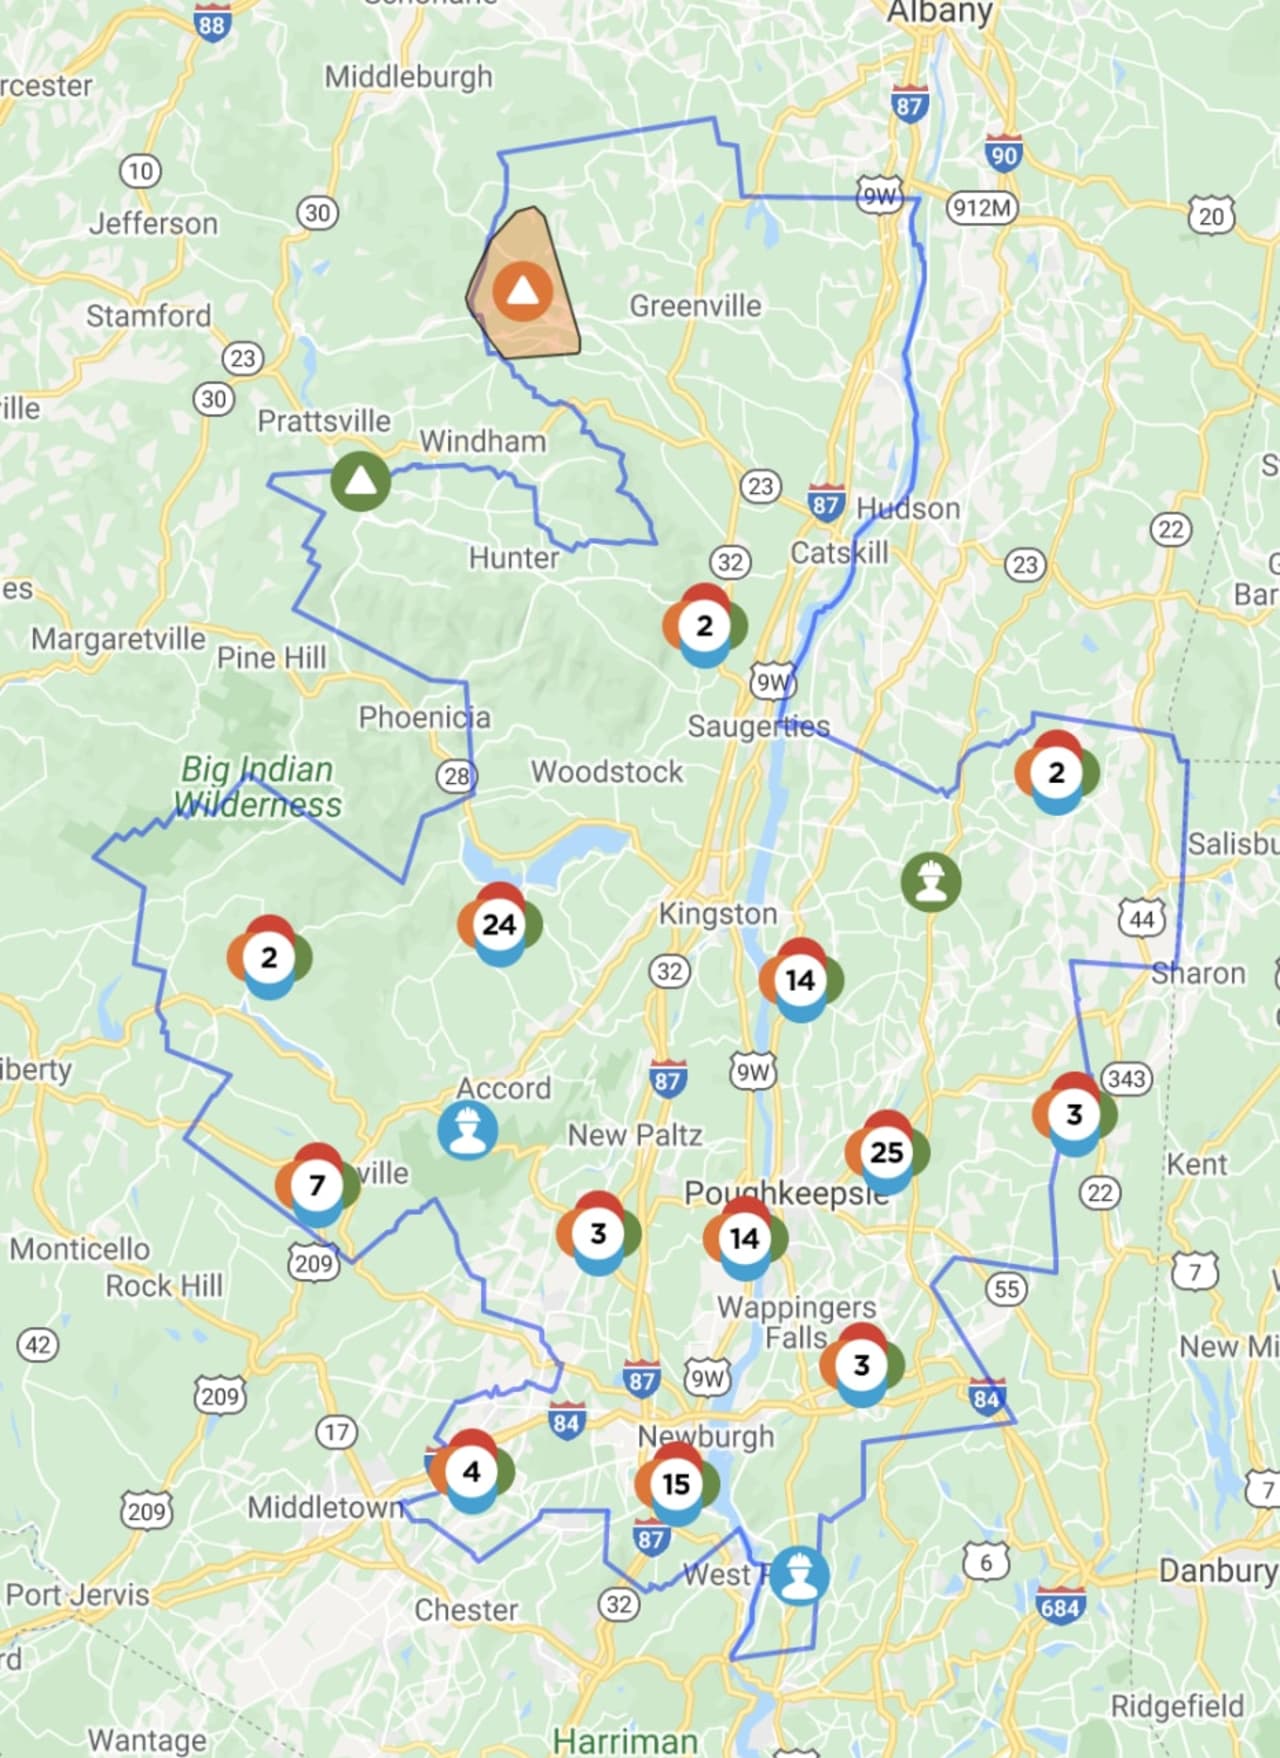 The outage map from Central Hudson as of 9:35 a.m. on Monday, Nov. 16.